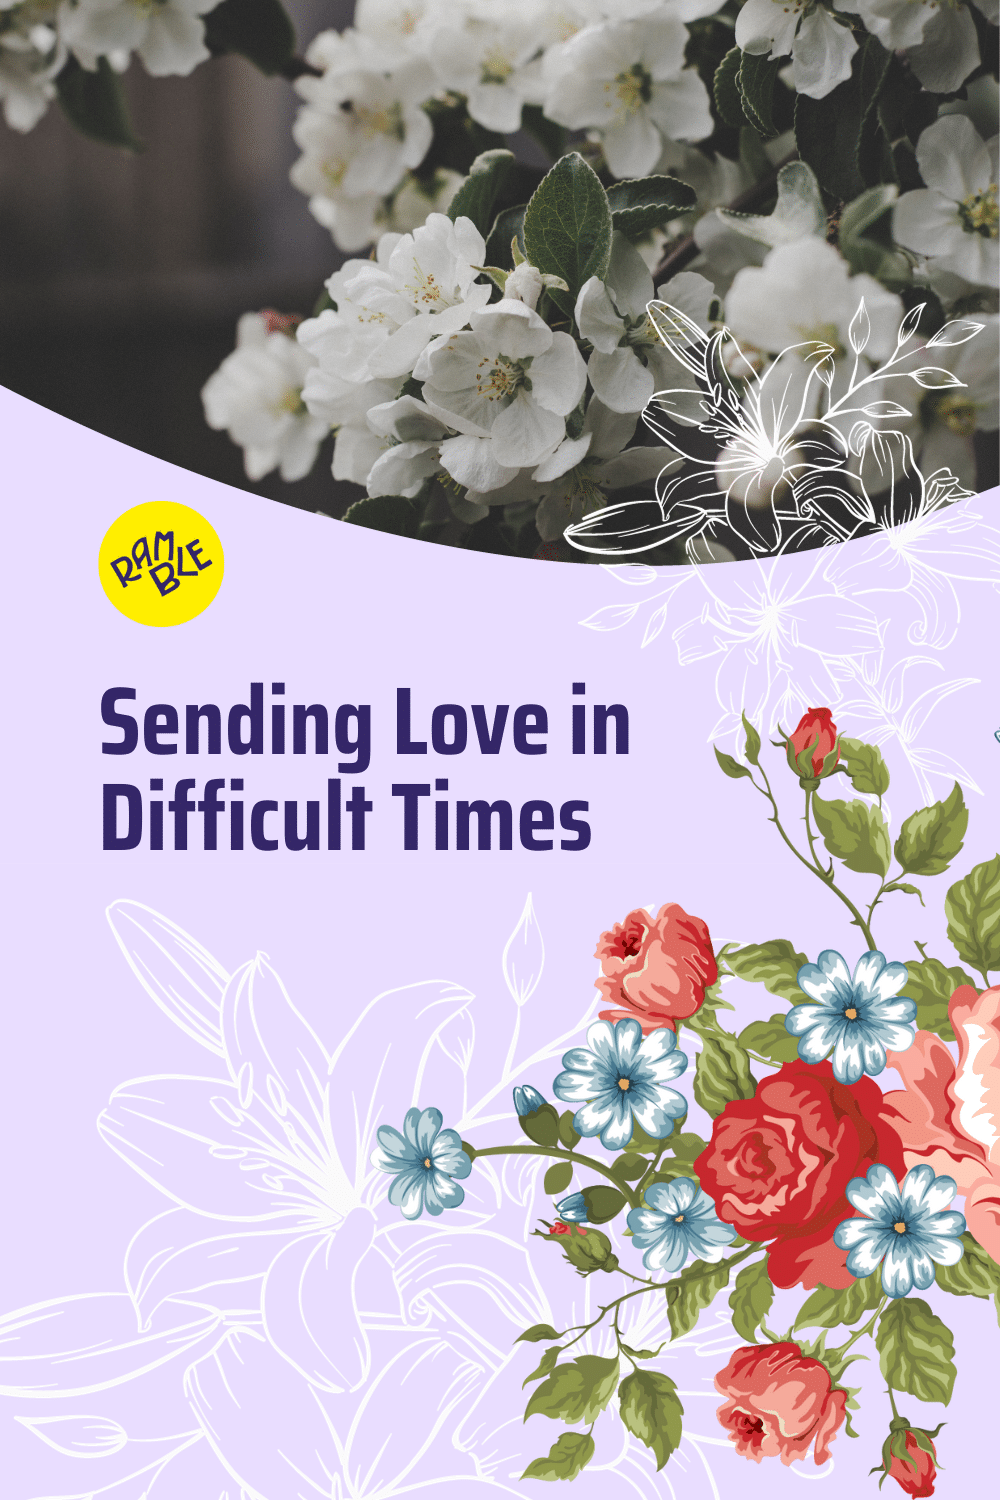 Ramble Gifts Pinterest—Seding Love in Difficult Times